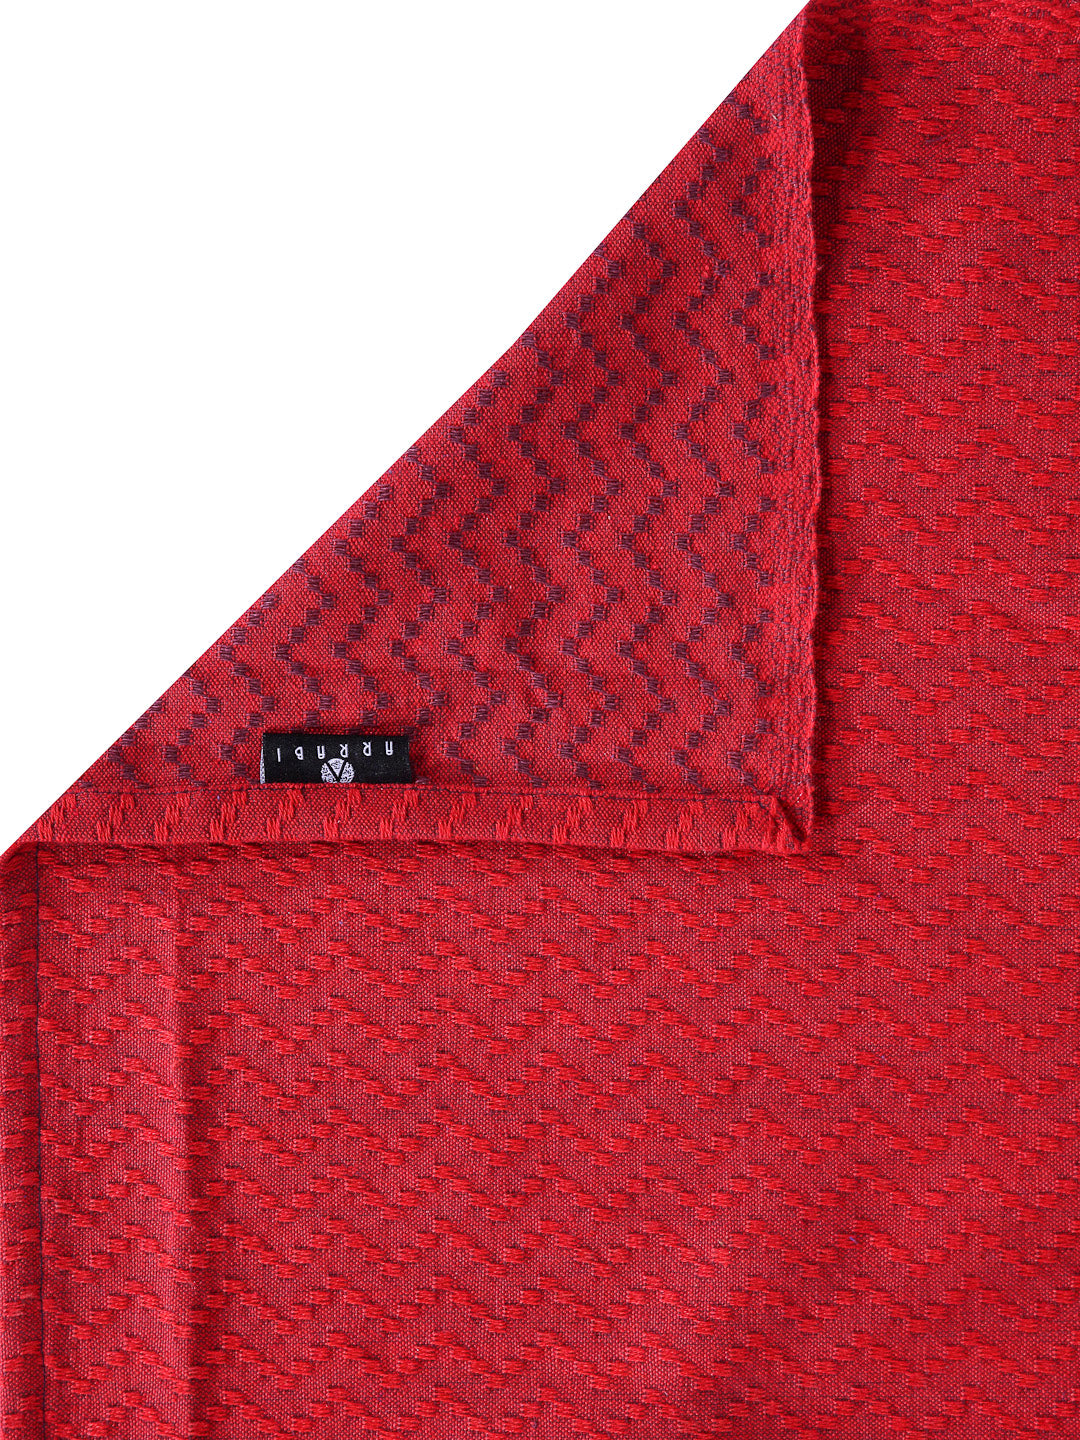 Arrabi Red Geometric Handwoven Cotton King Size Bedsheet with 2 Pillow Covers (260 X 230 cm)